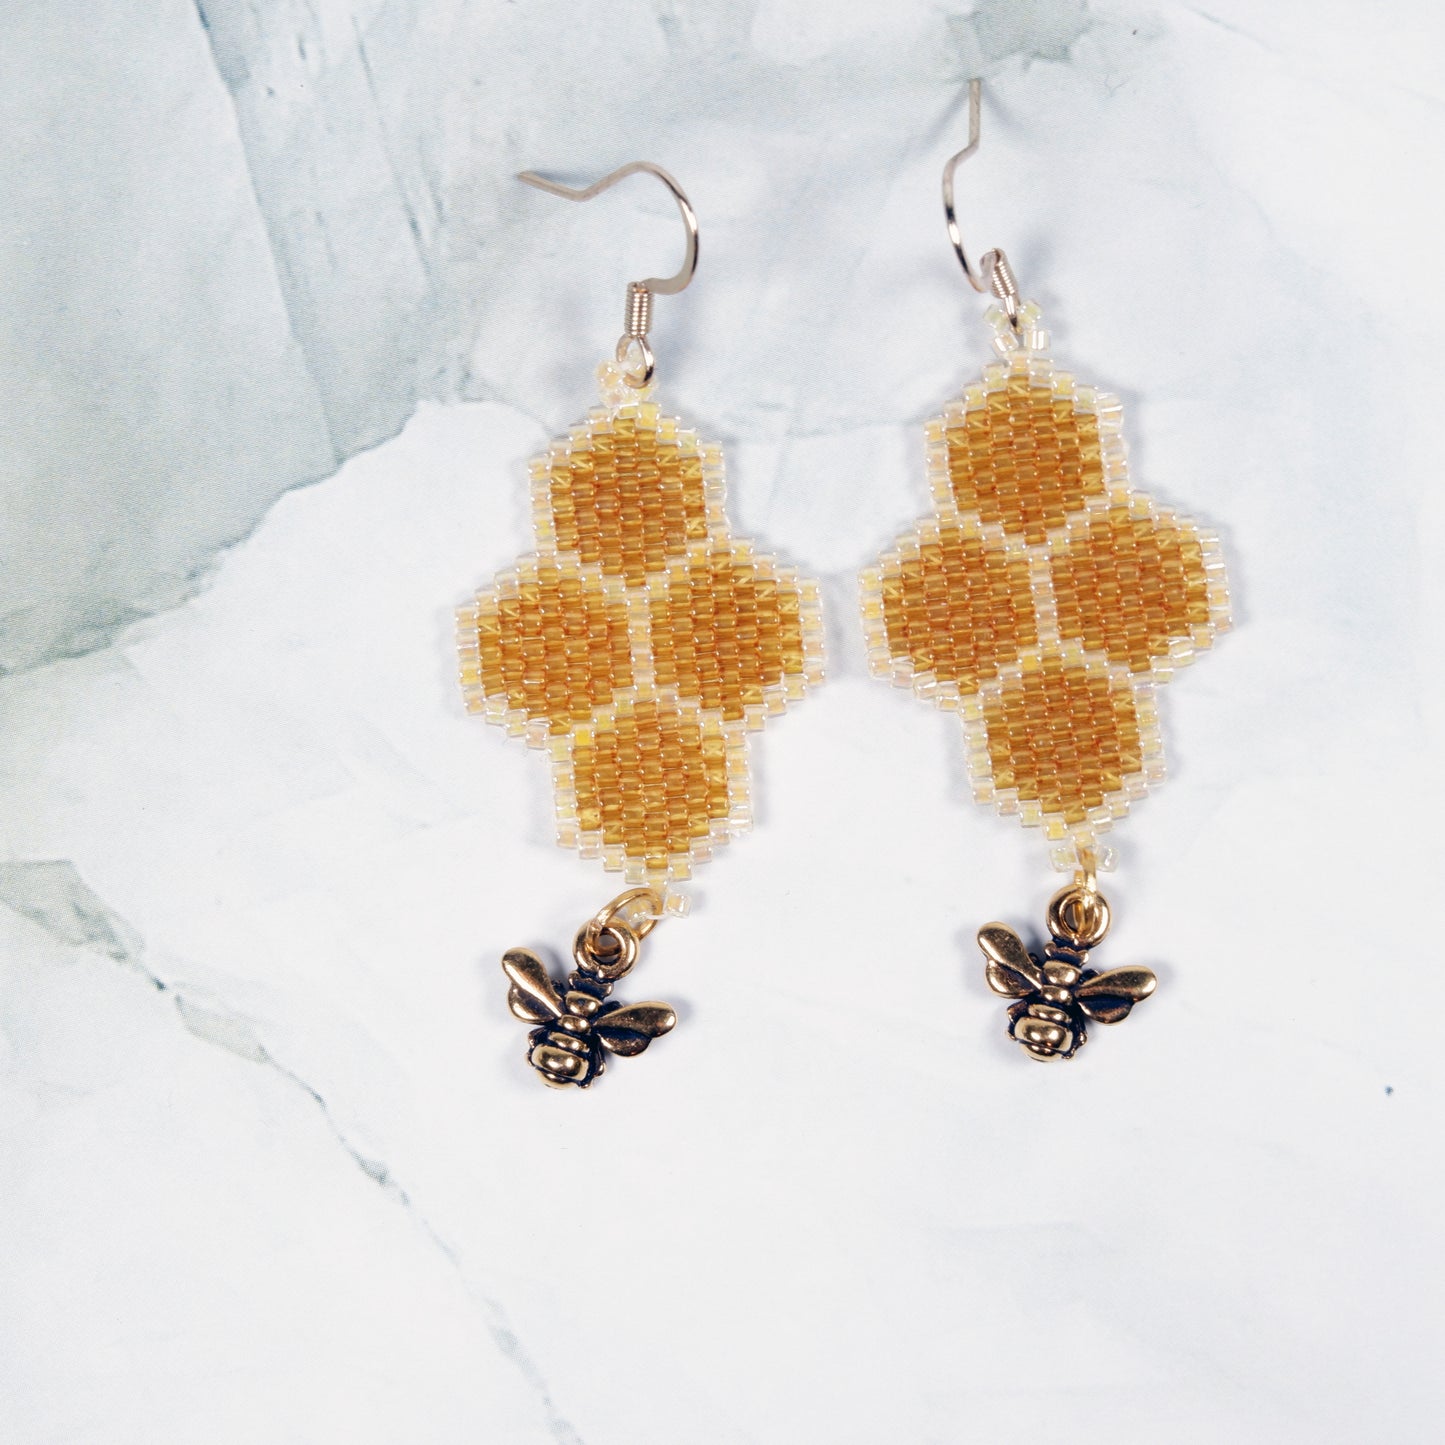 Large Honeycomb Earrings with Bee